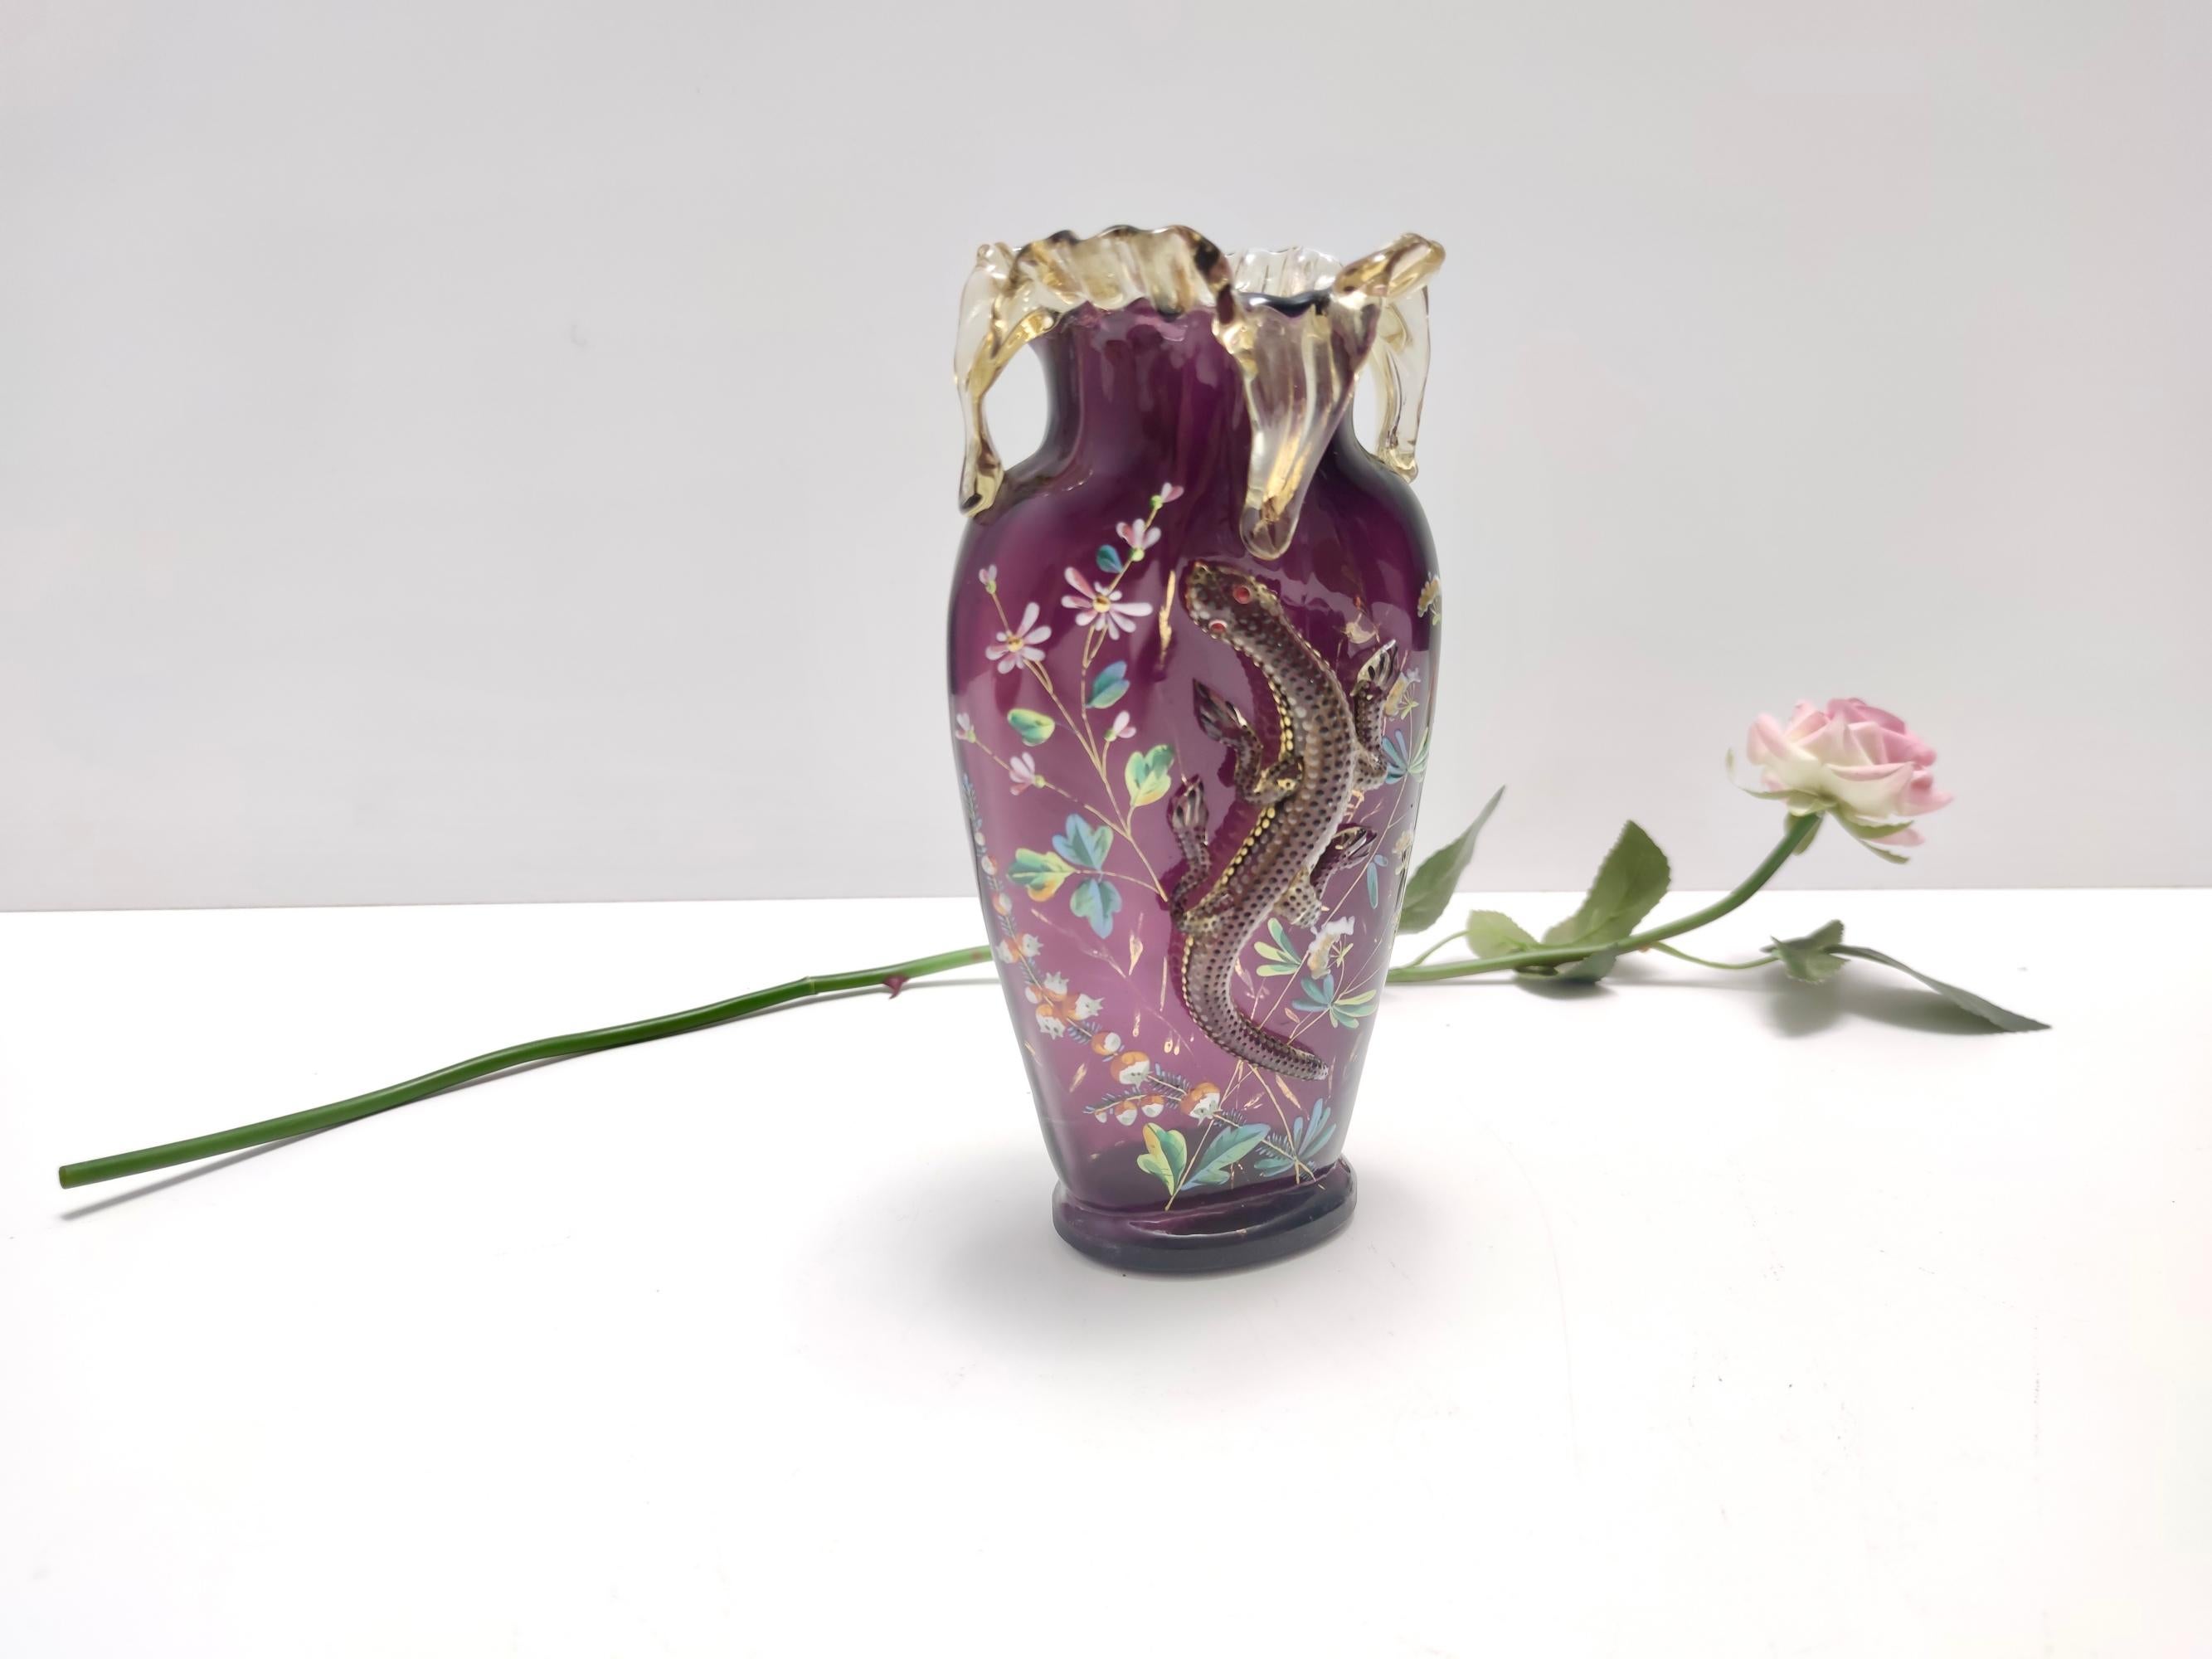 1890s. Probably made in Bohemia or in a Northern European country.
This beautiful blown glass vase is rendered in a lovely amethyst color.
It features a modeled glass salamander, applied with a melting technique, and a glazed floral decoration.